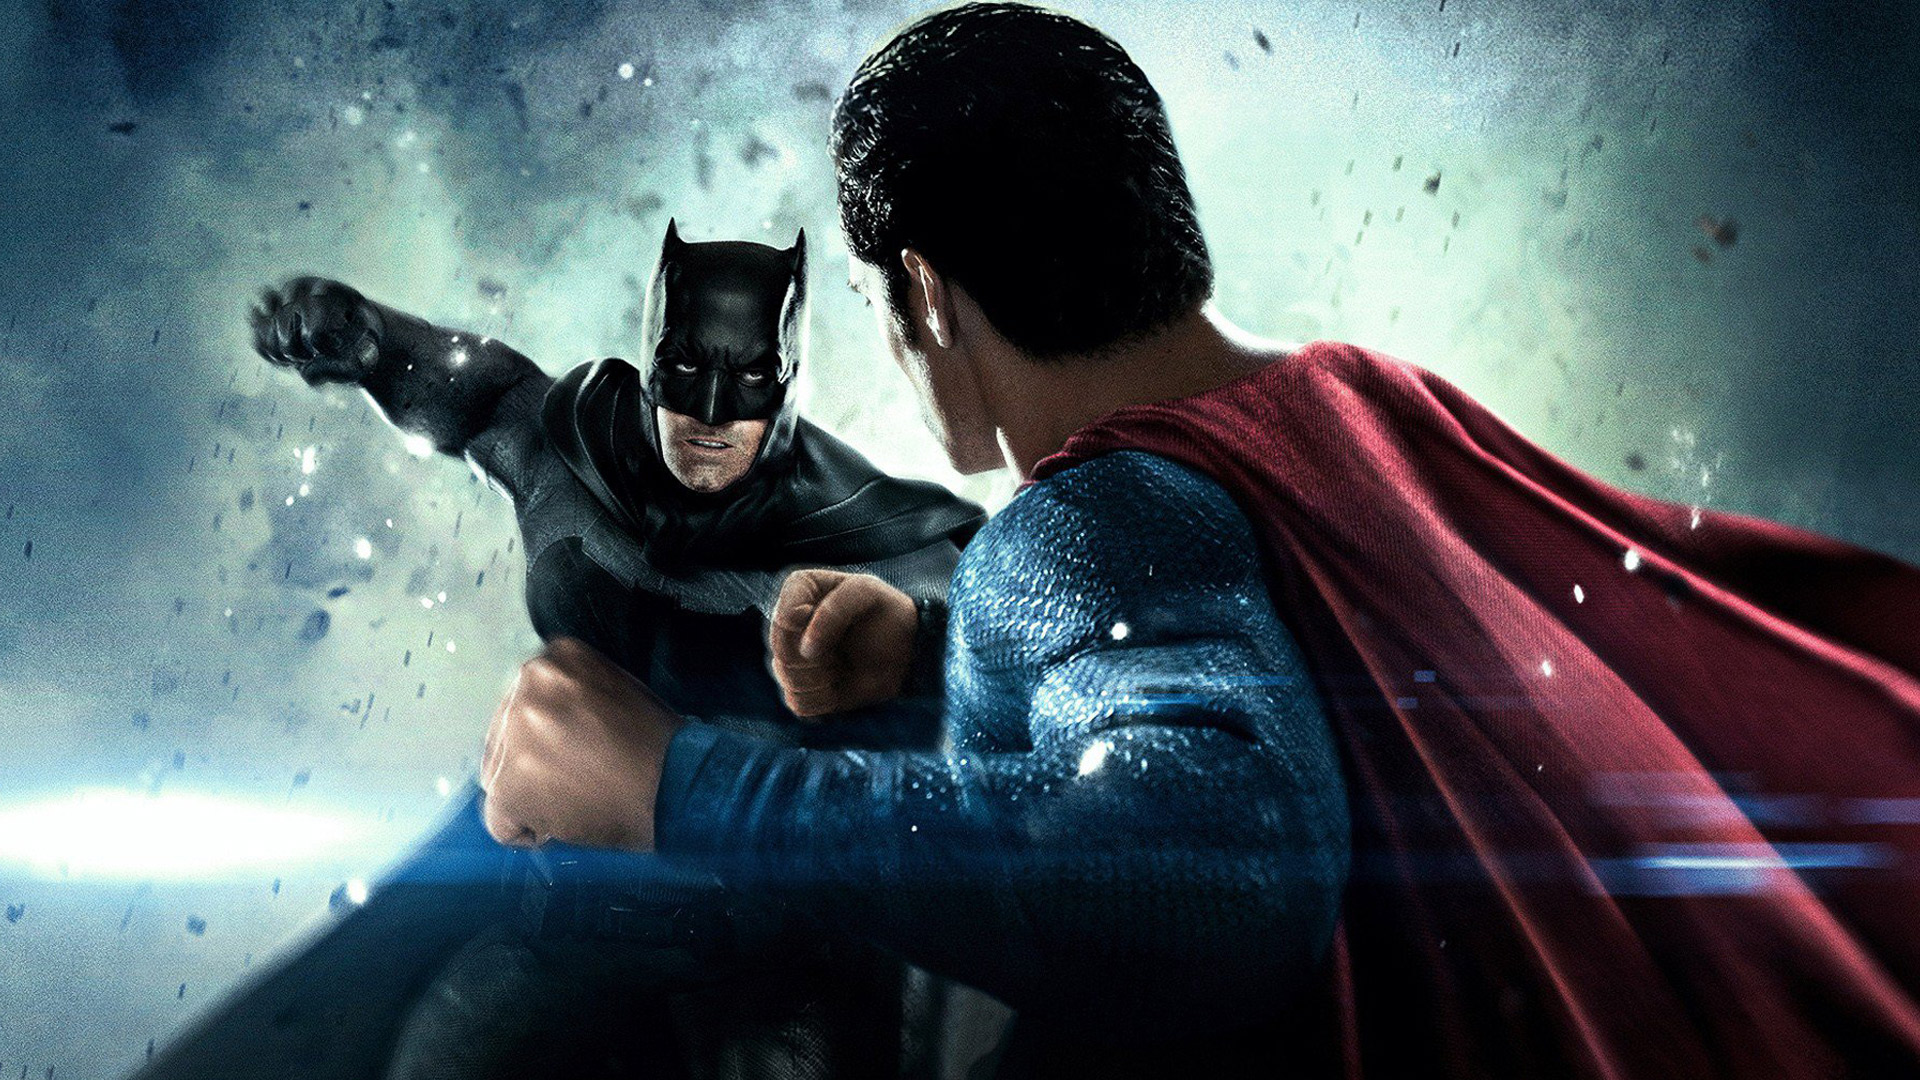 Batman v Superman: Dawn of Justice Is the Worst DCEU Movie